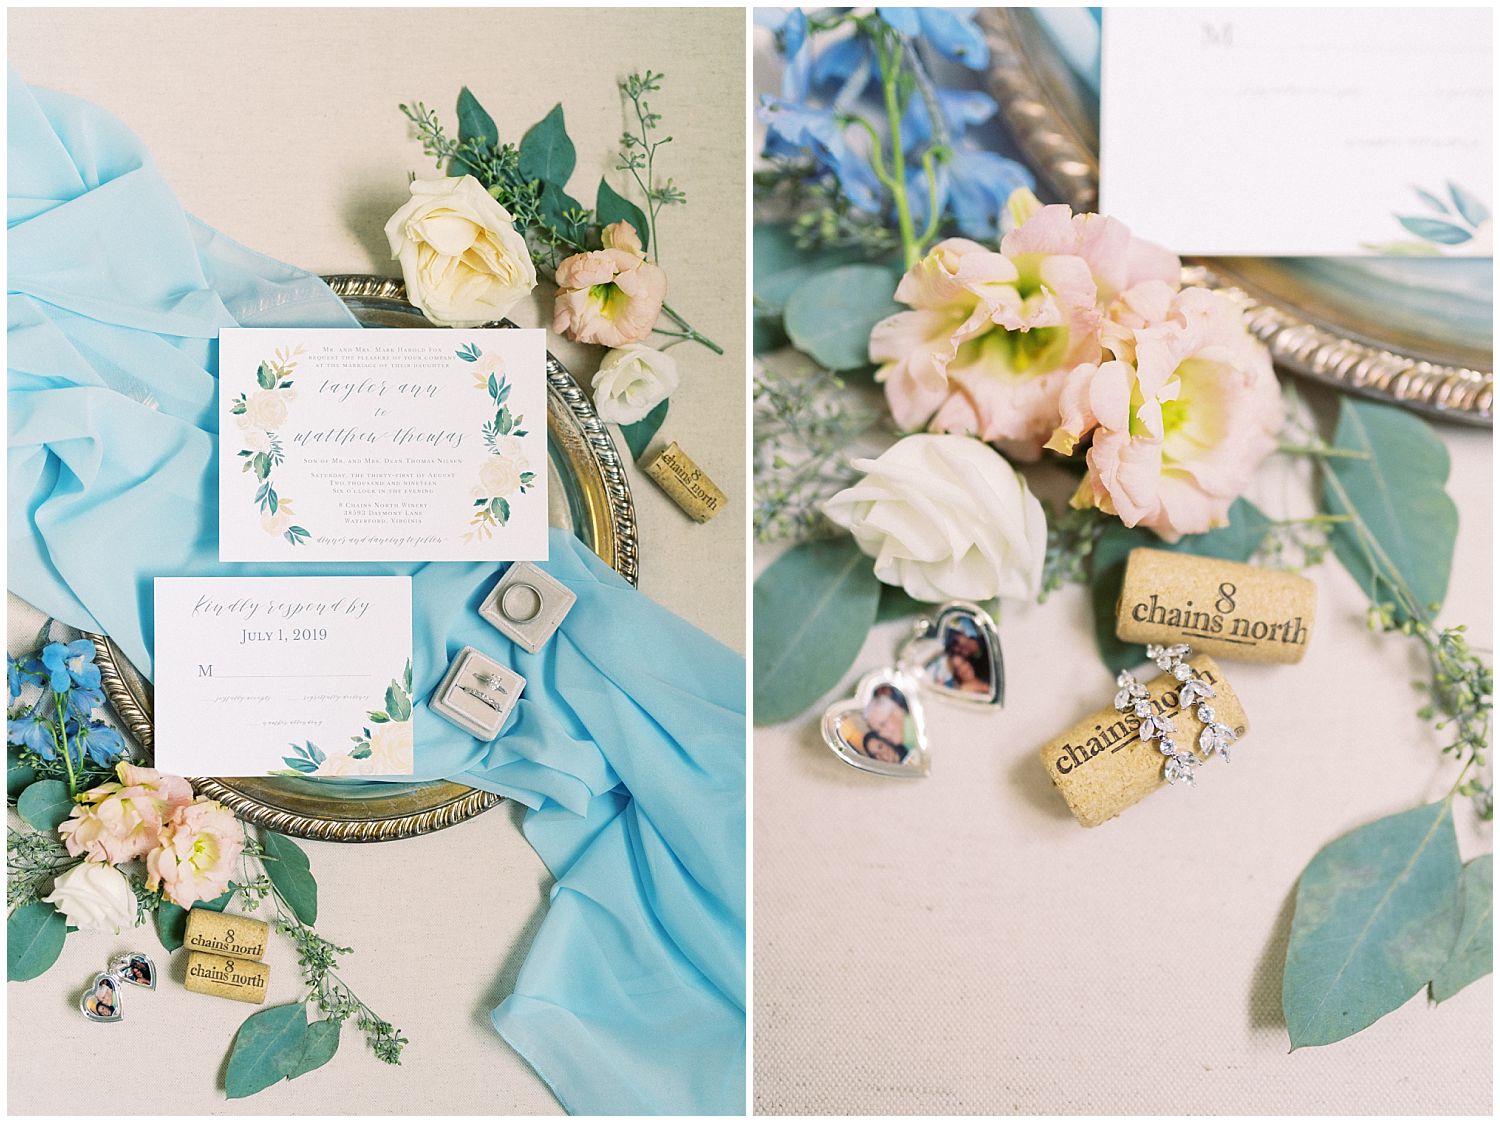 Dusty blue and pink wedding stationery details